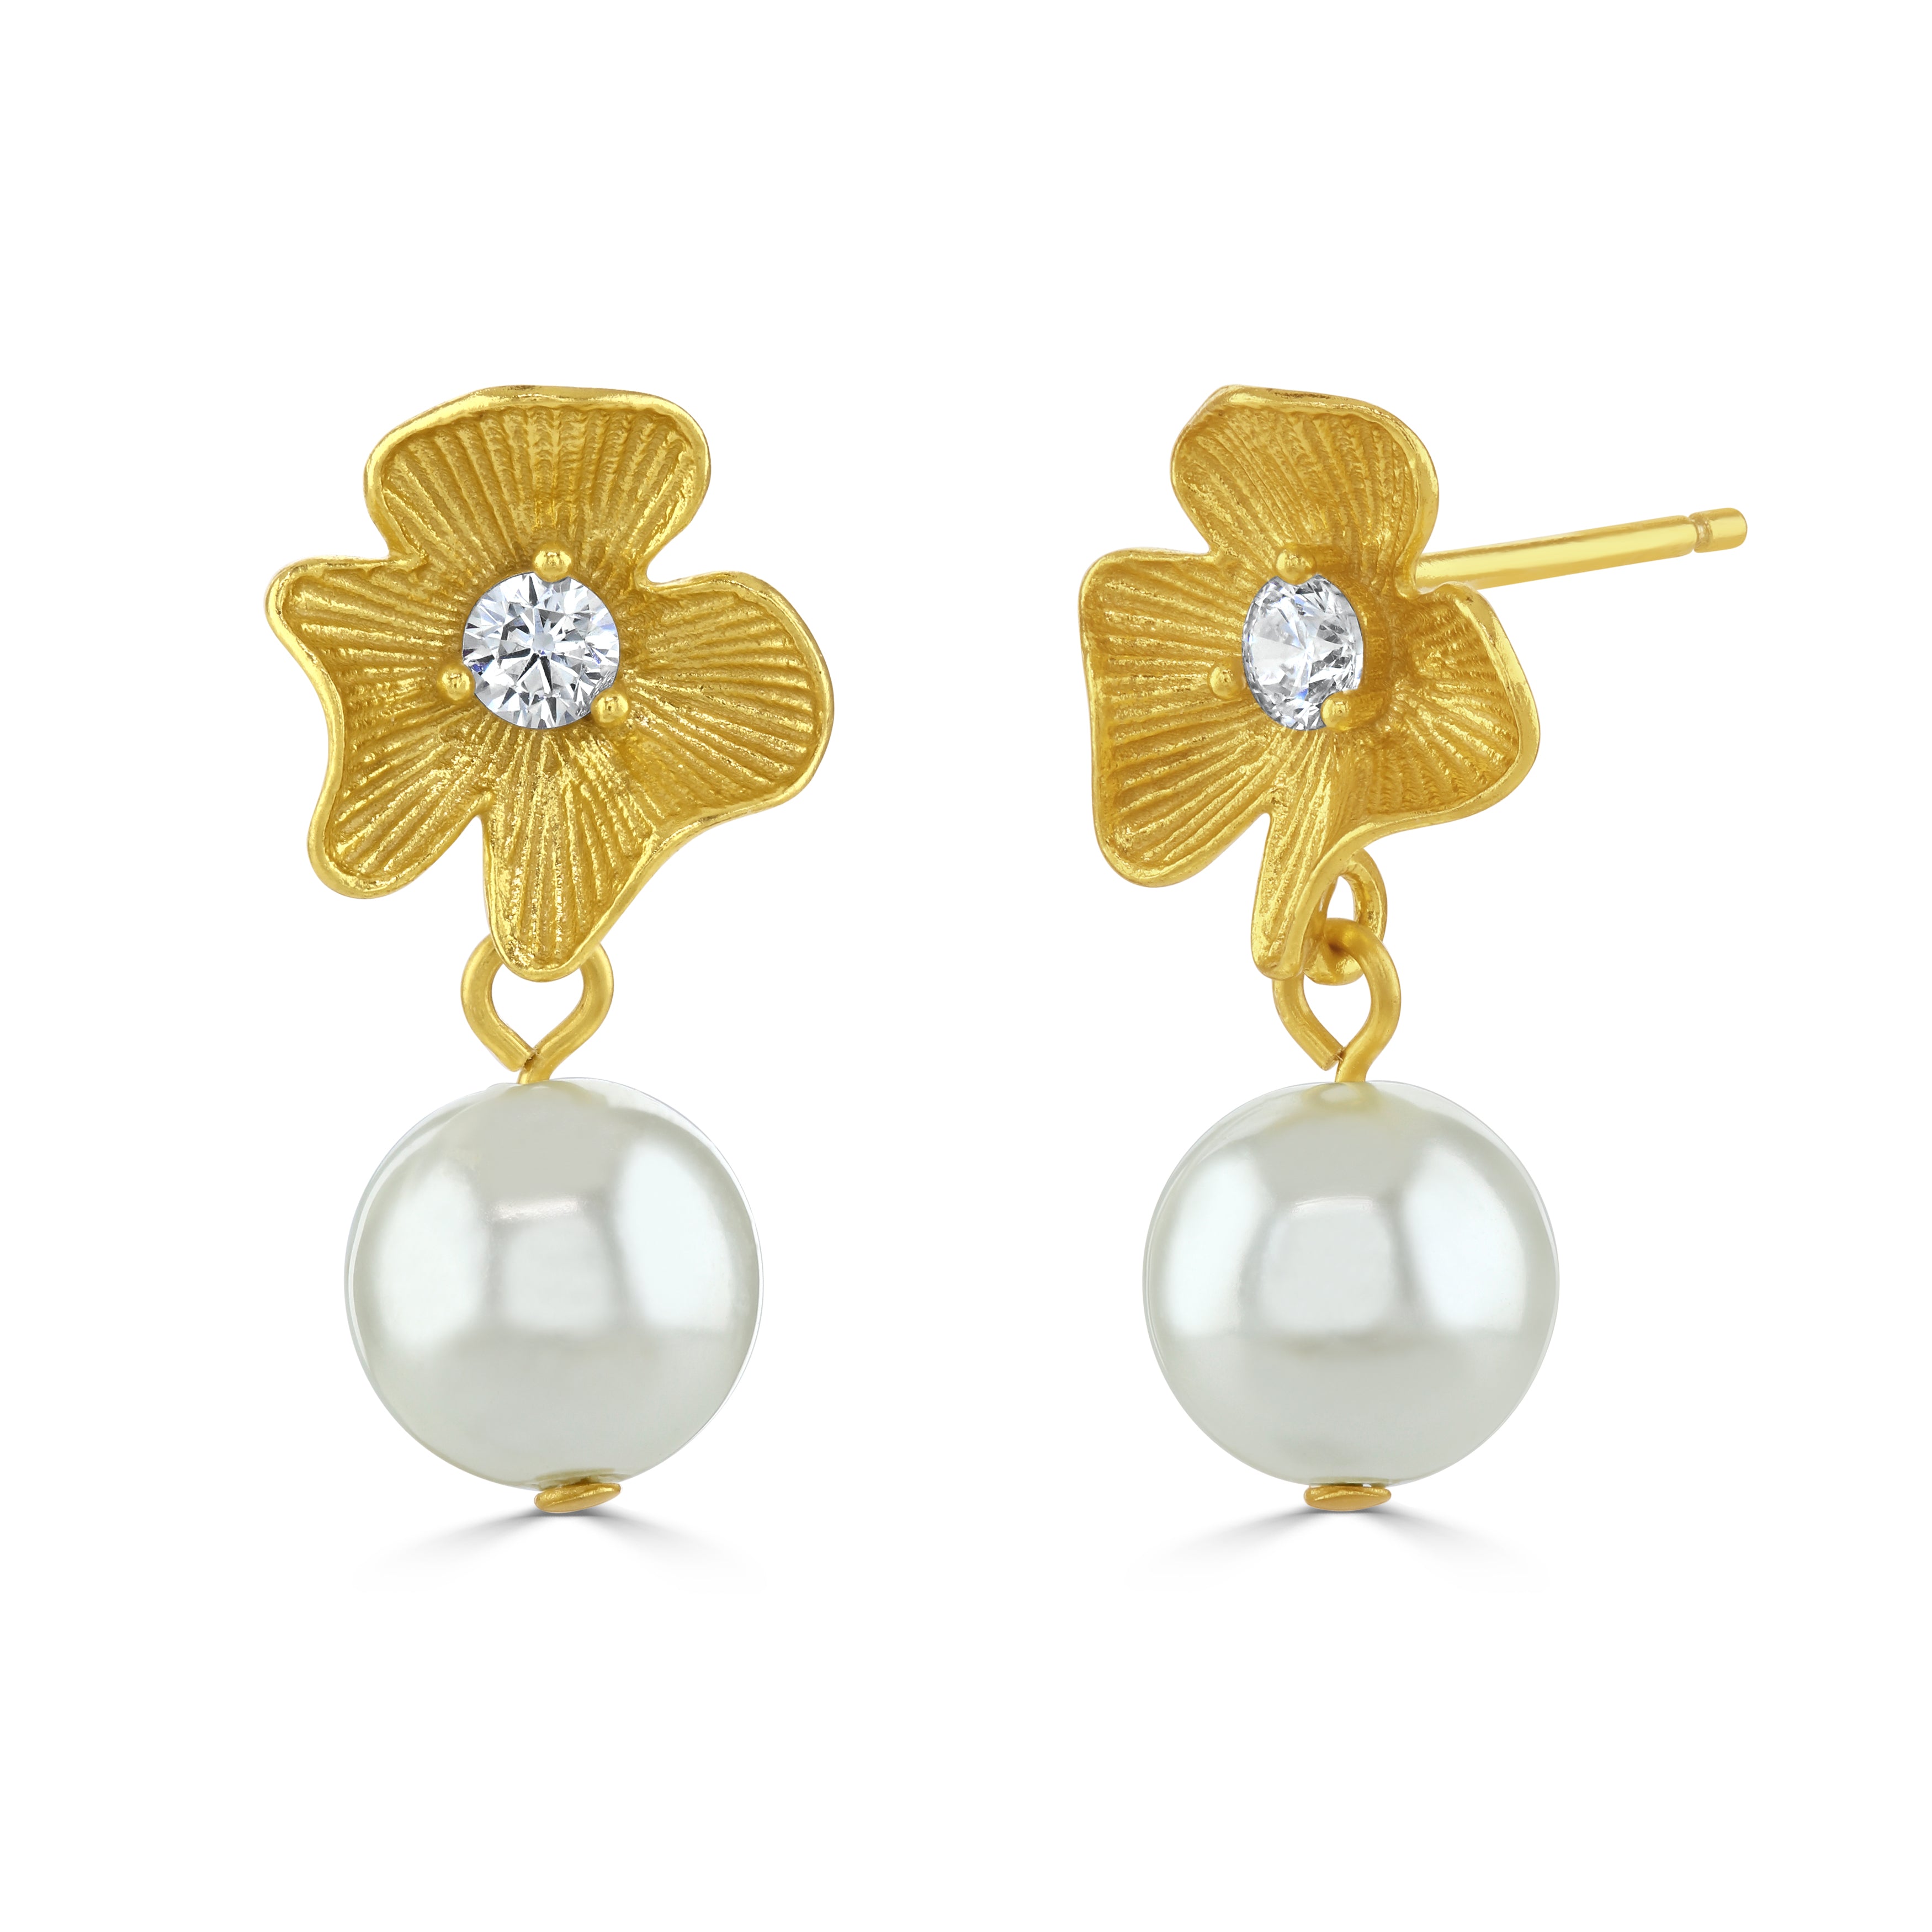 HANA // Gold floral and pearl earrings